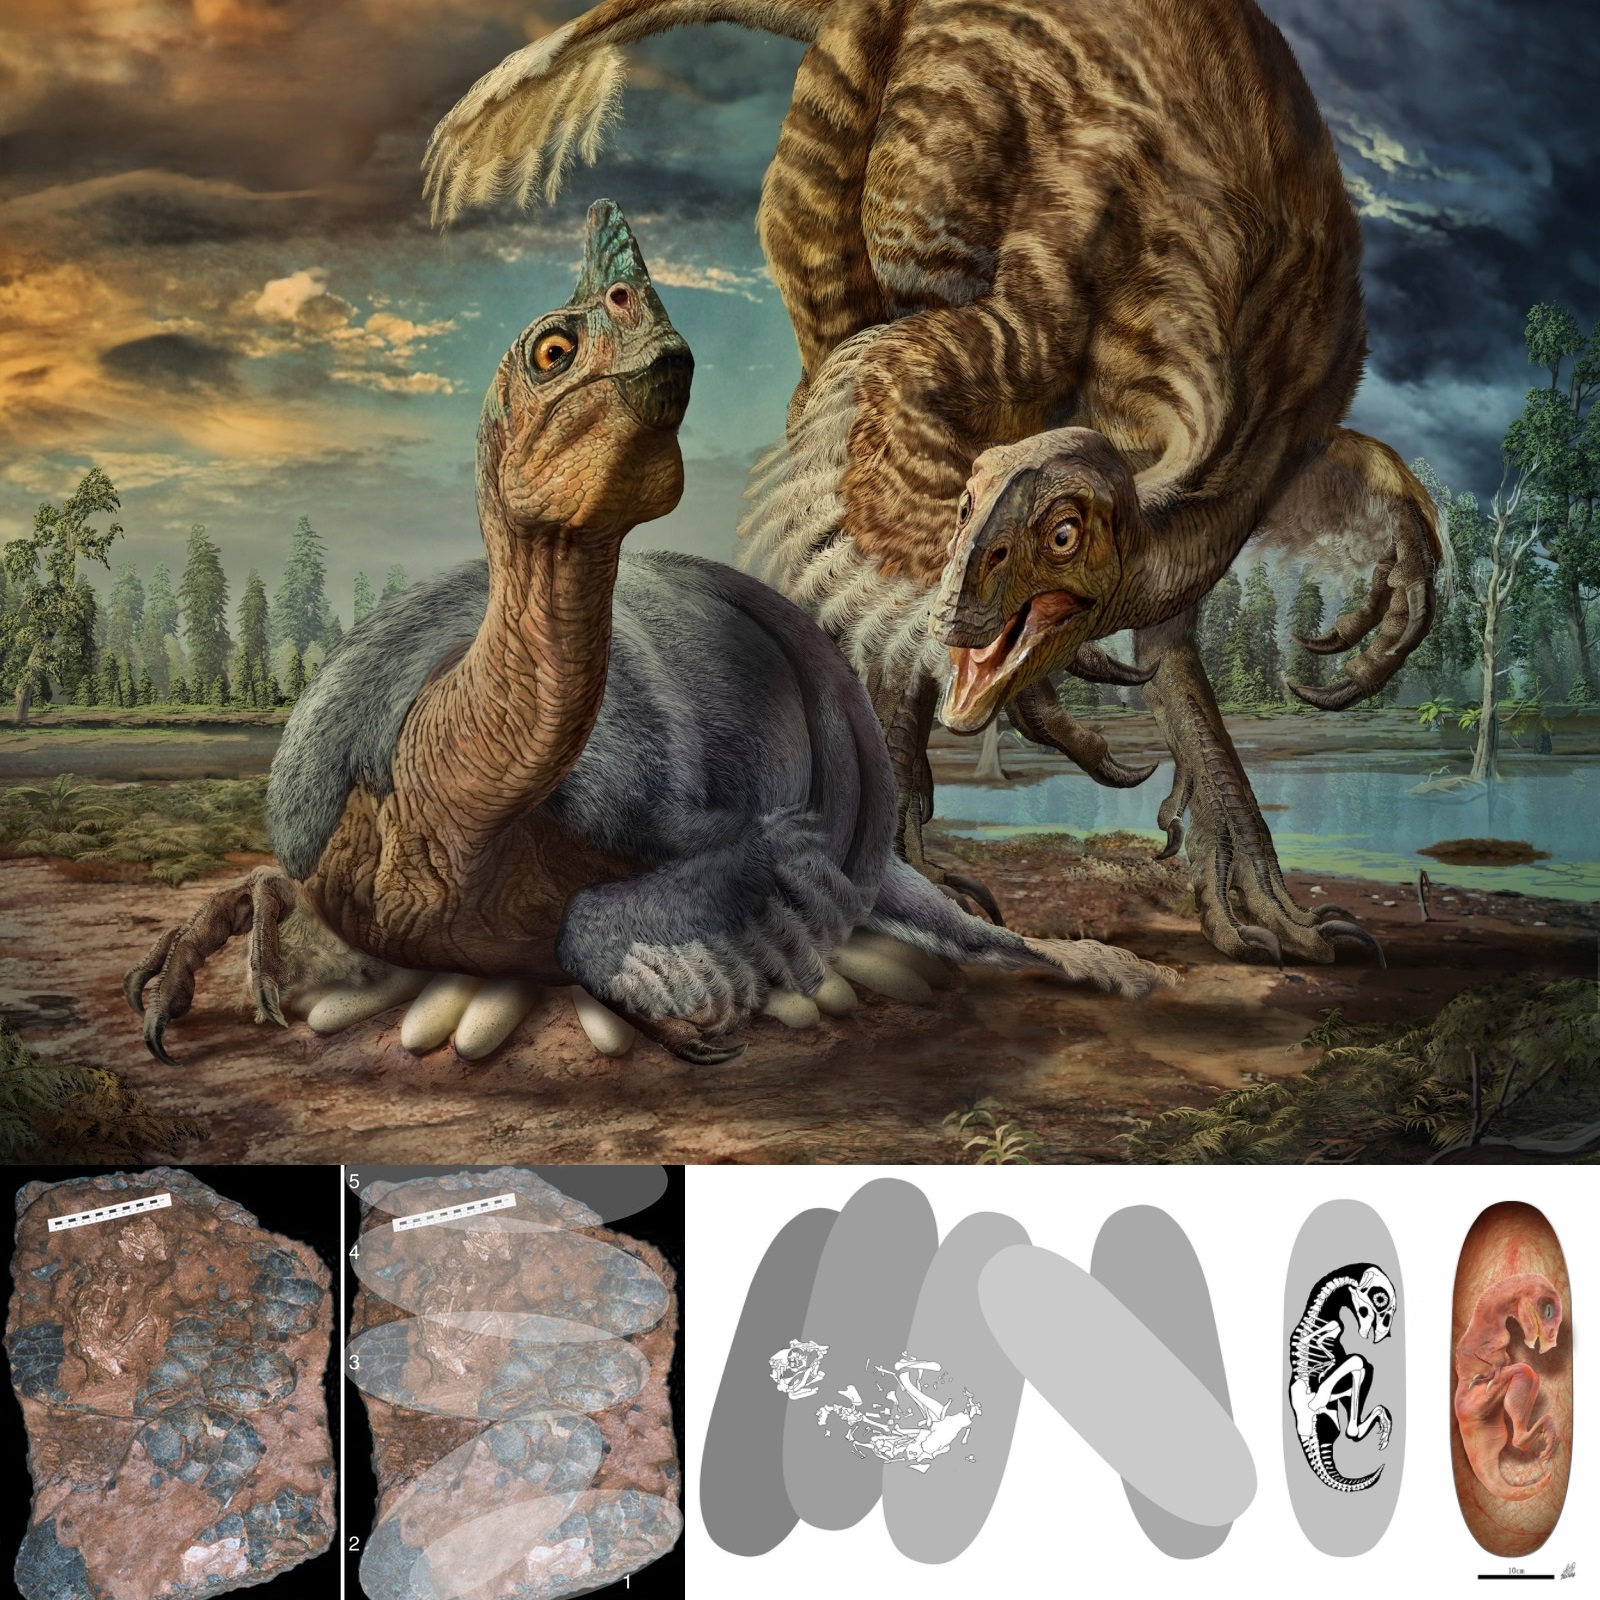 Species New to Science: [Paleontology • 2017] Beibeilong sinensis • Perinate and Eggs of A Giant Caenagnathid Dinosaur from the Late Cretaceous of central China